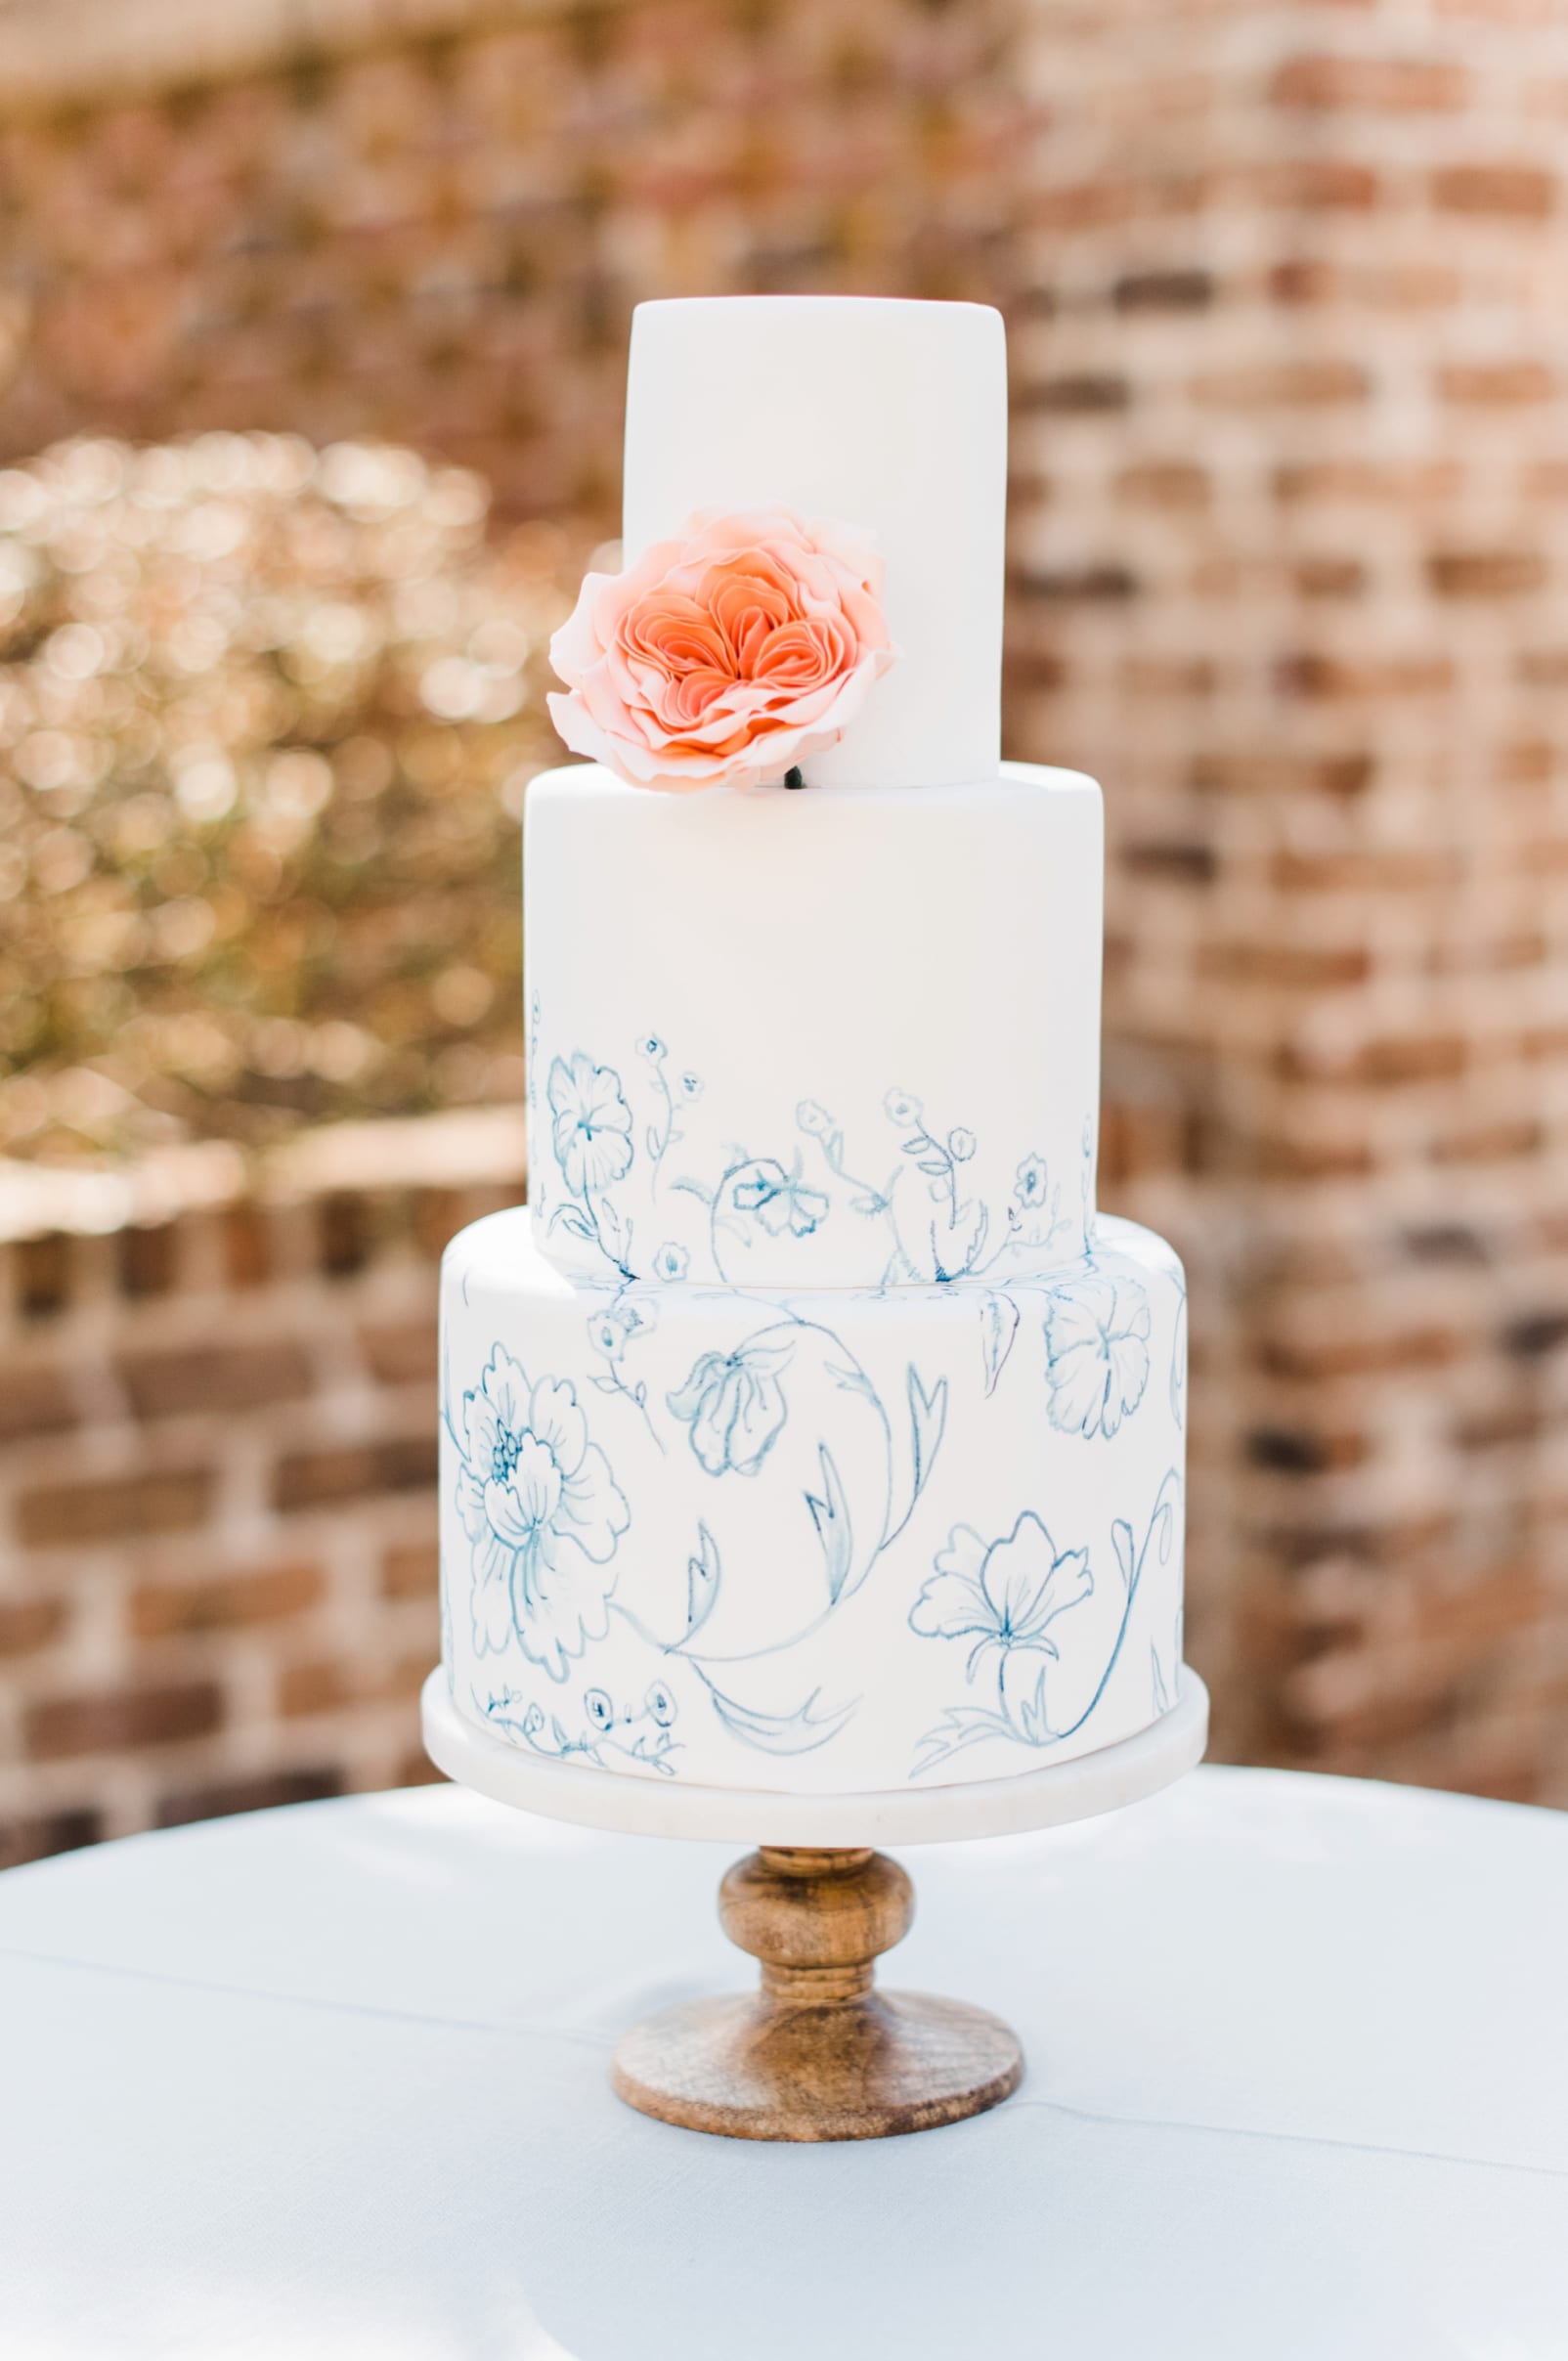 The cupcake shoppe 3 tiered wedding cake with light blue floral designs photo